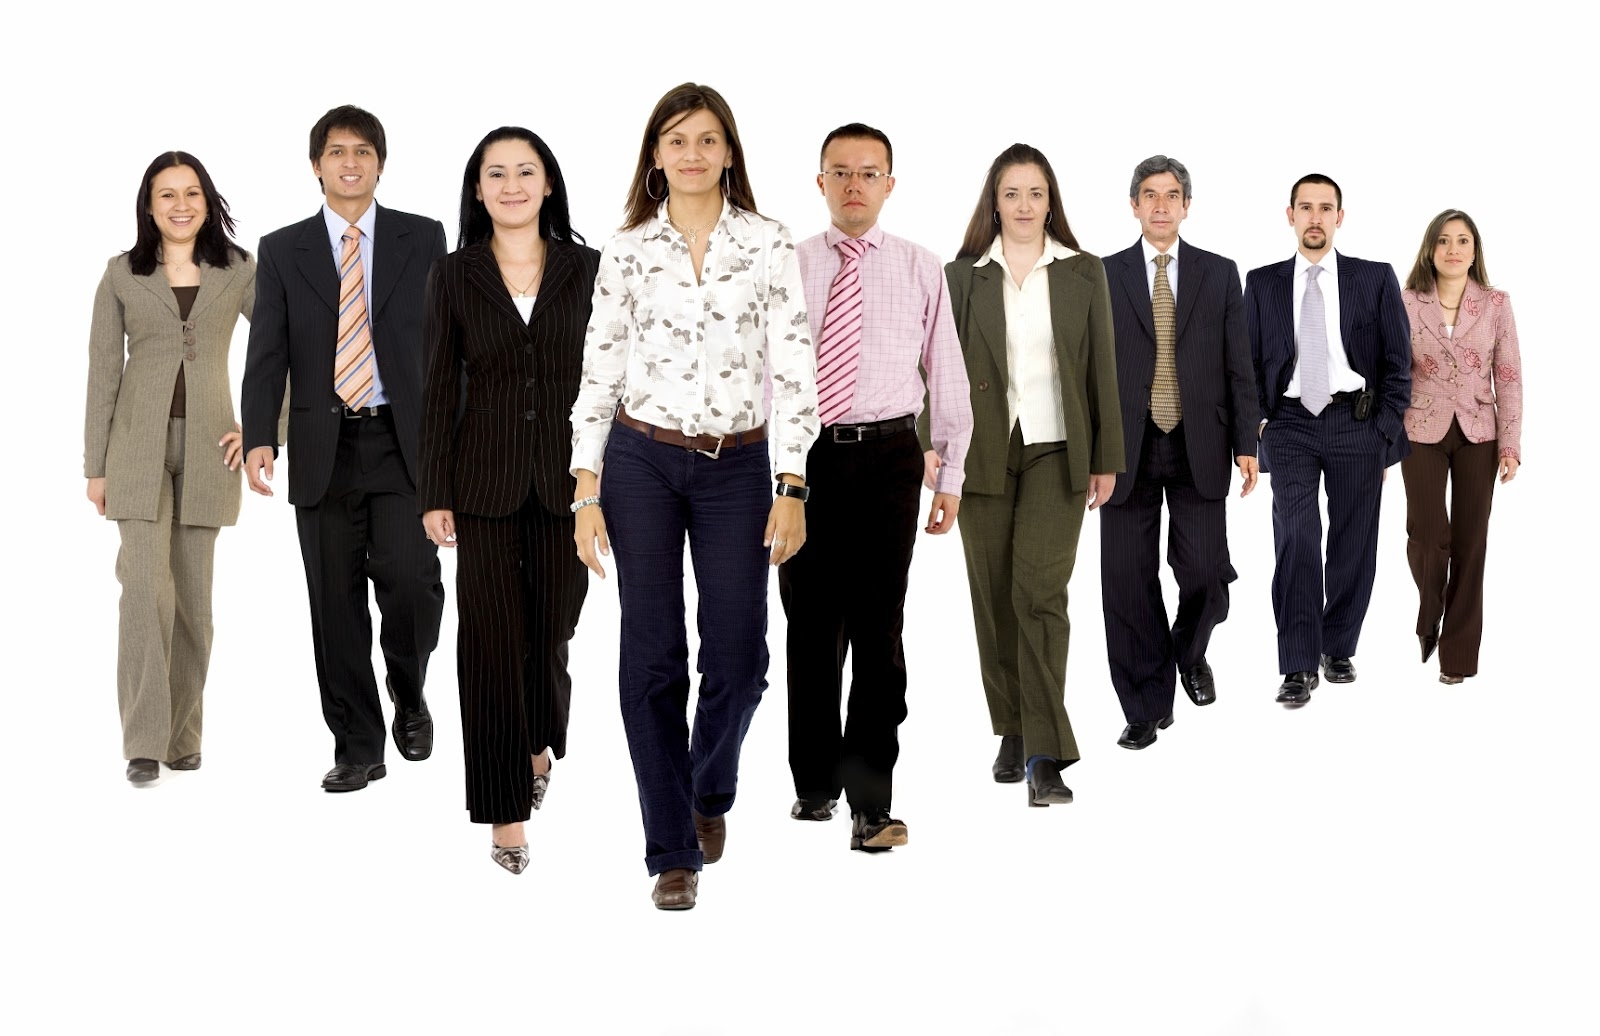 Download Stock Photos of competent professional people images 1600x1036